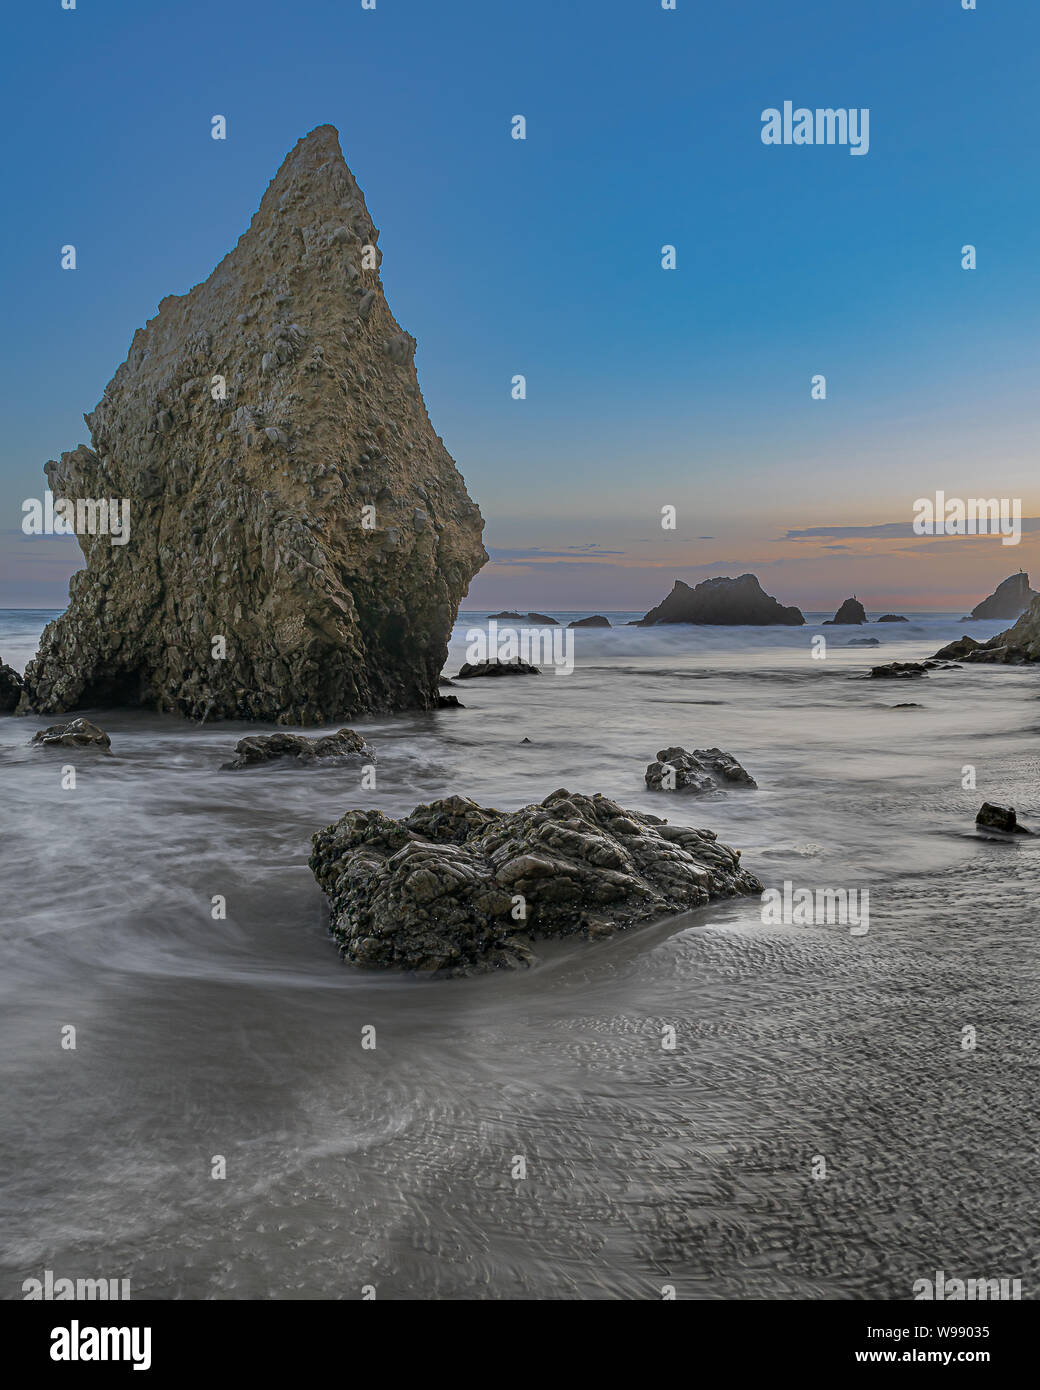 The unique rock formations and amazing sunset views are big two reasons for the popularity of El Matador beach near Malibu in southern California. Stock Photo